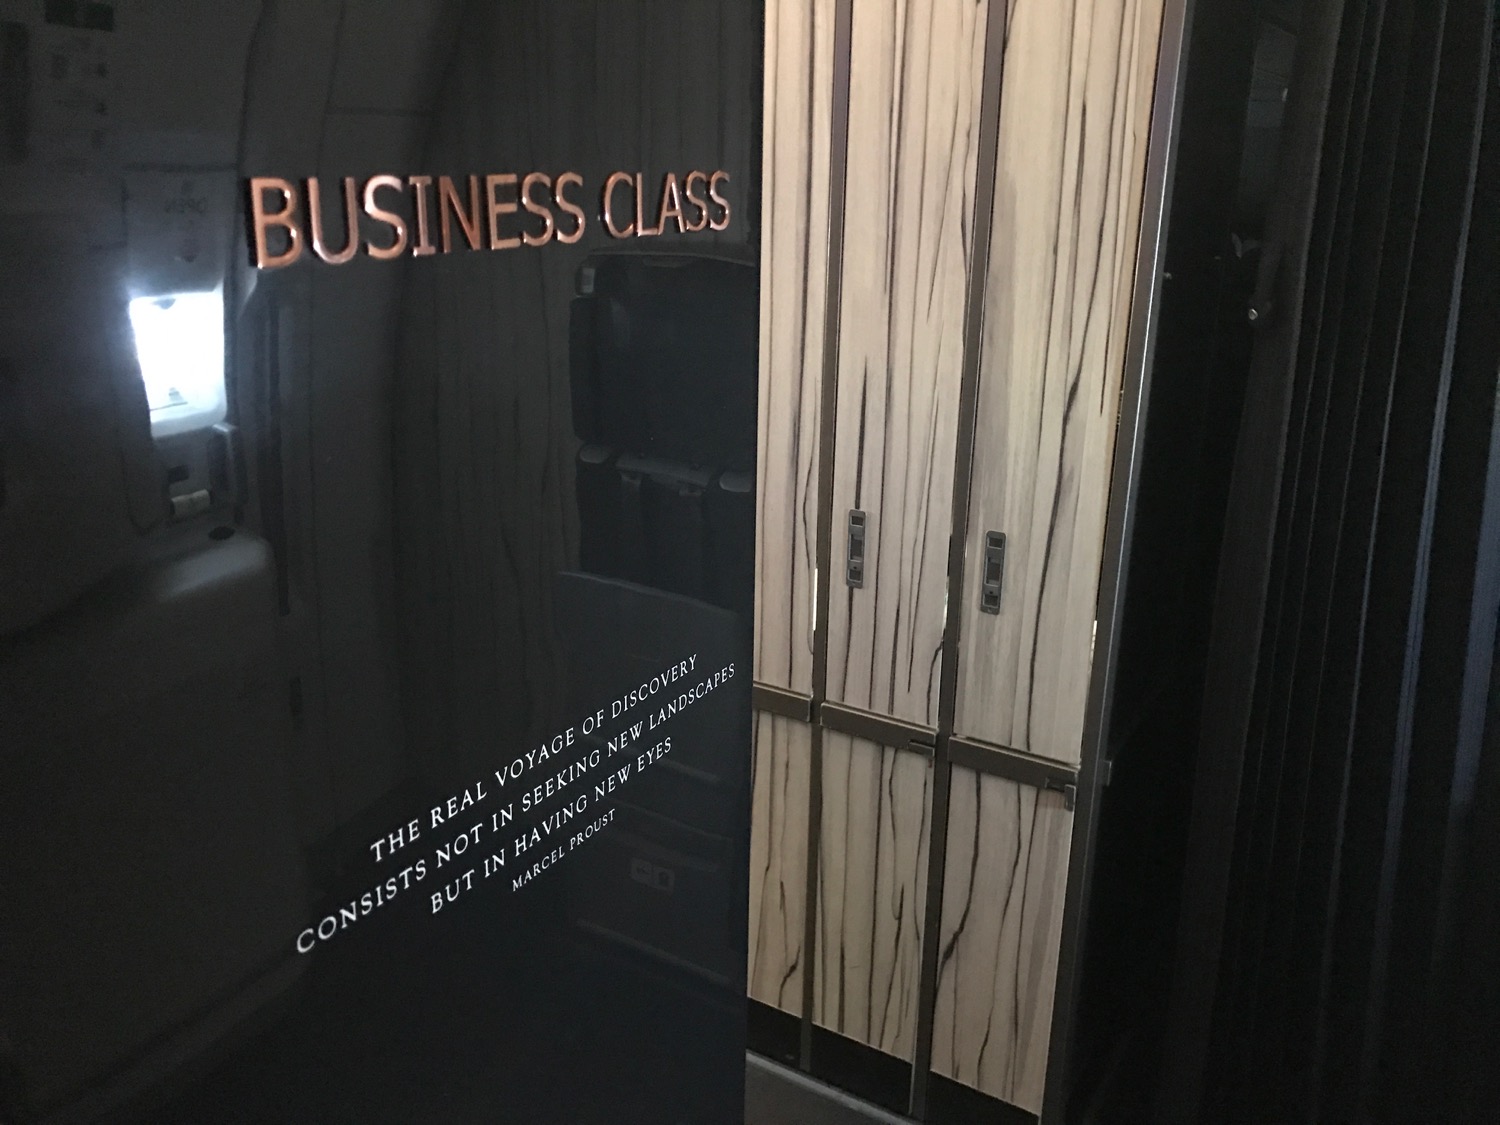 China Airlines A350 Business Class Review - 117